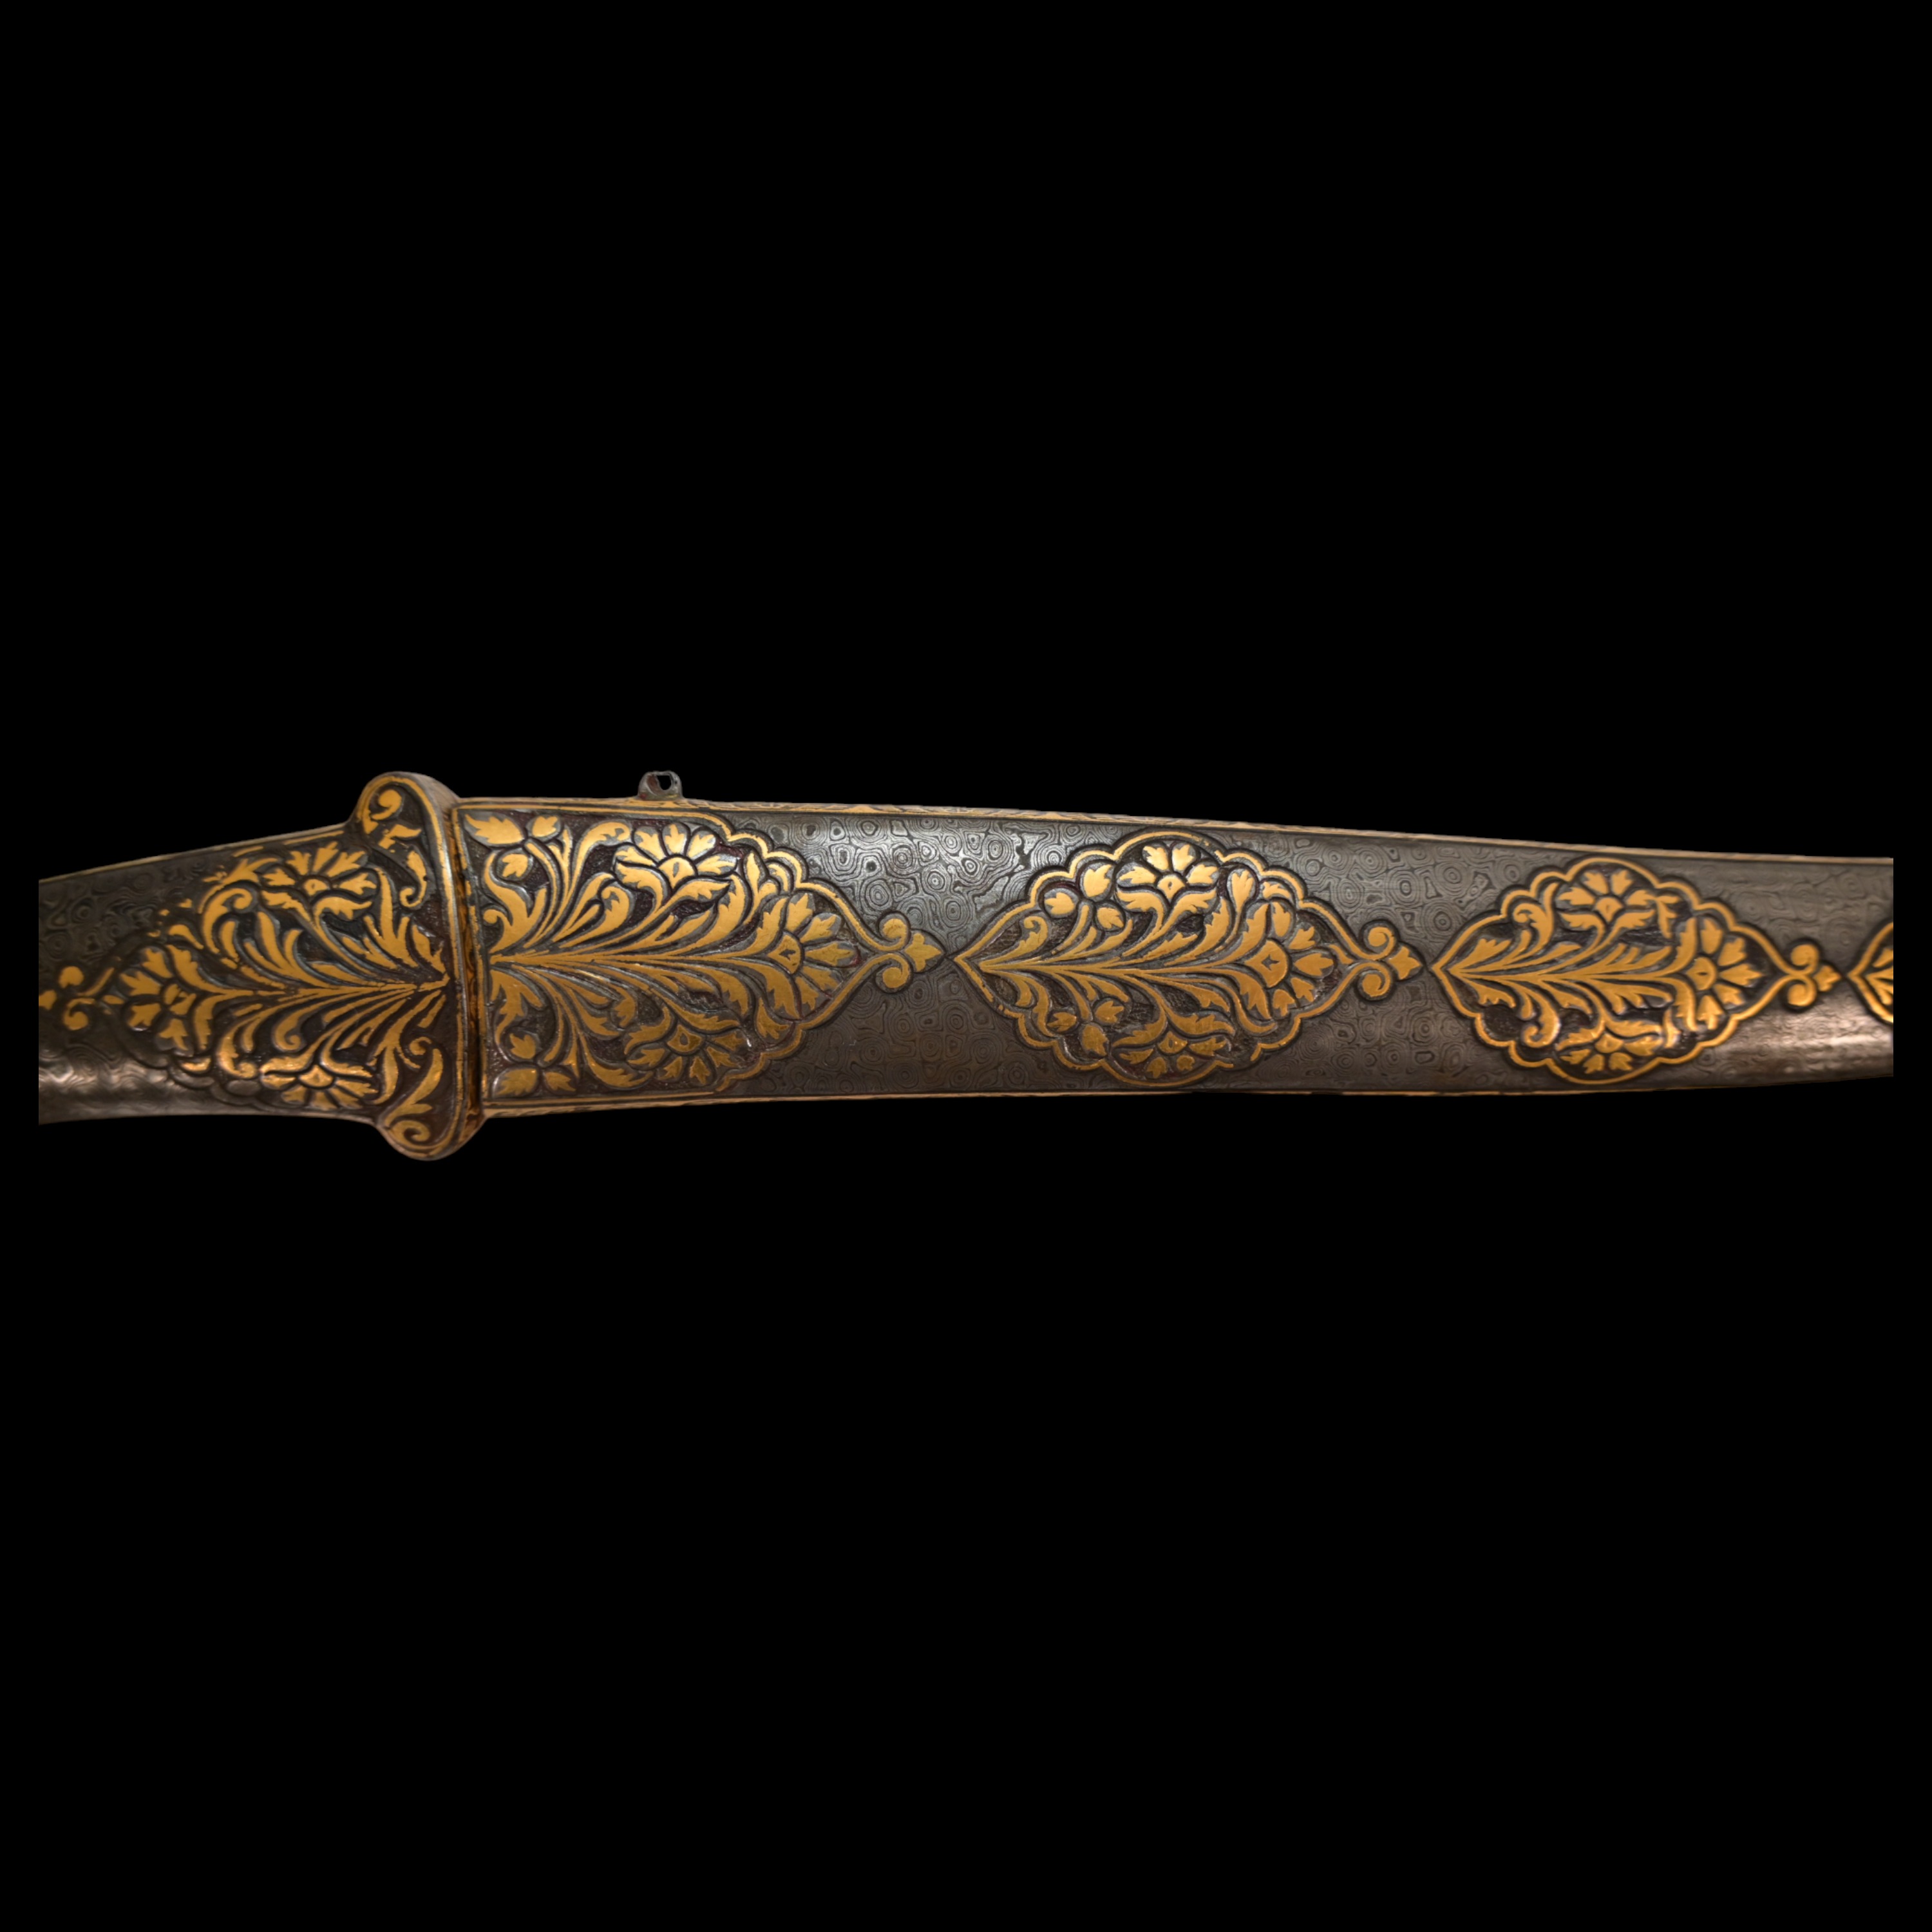 Richly decorated gold kofgari Indian dagger with wootz blade, 19th century. - Image 8 of 12